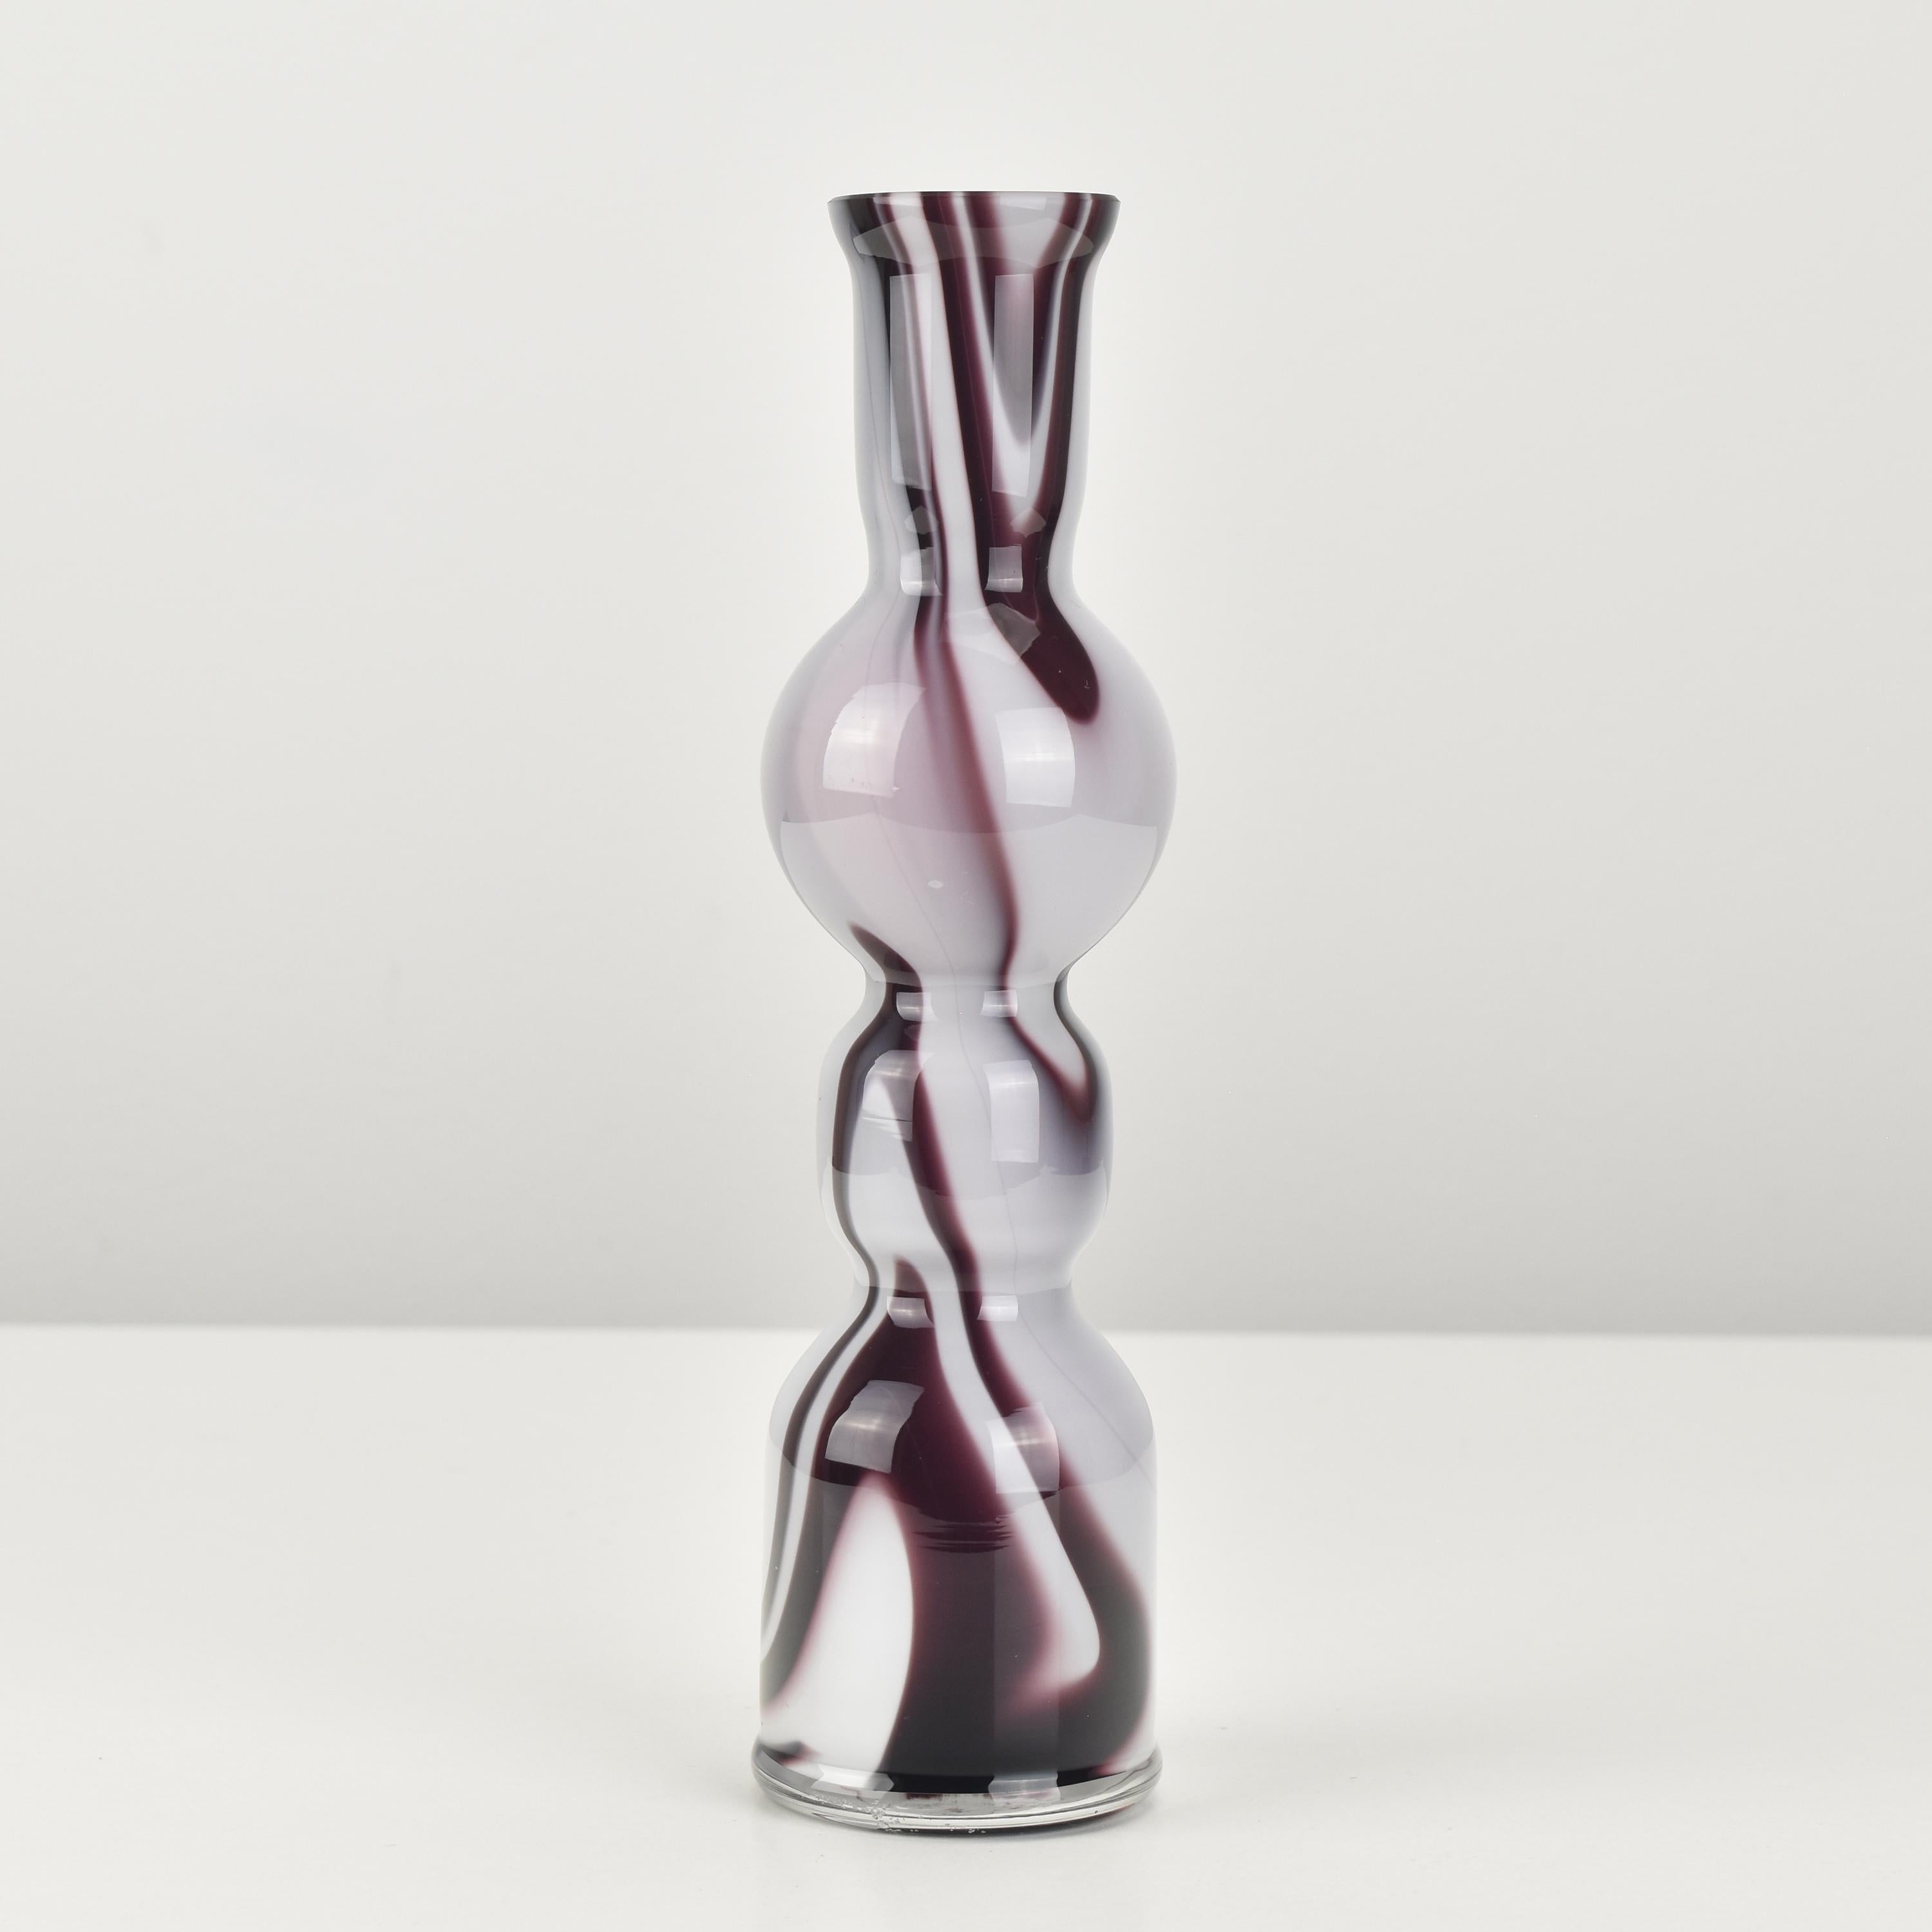 Purple and white marbled art glass vase by Carlo Moretti from the 1970s. This is a stunning piece of Venetian studio art glass that reflects the unique style and creativity of the artist. The purple and white marbled pattern creates a mesmerizing